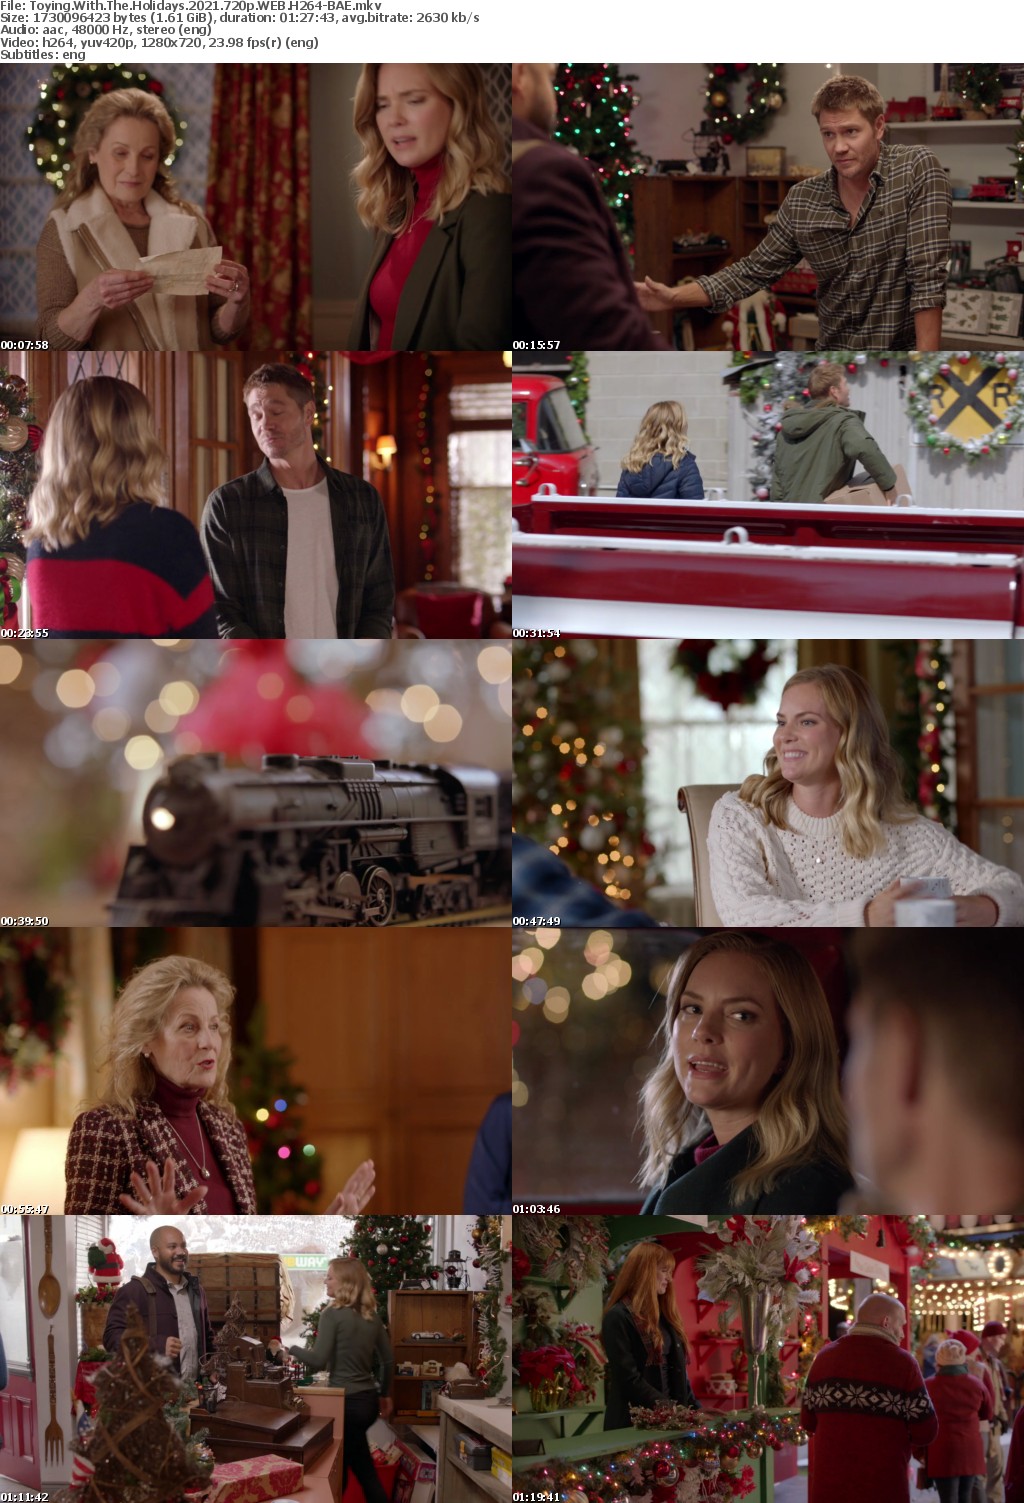 Toying With The Holidays 2021 720p WEB H264-BAE